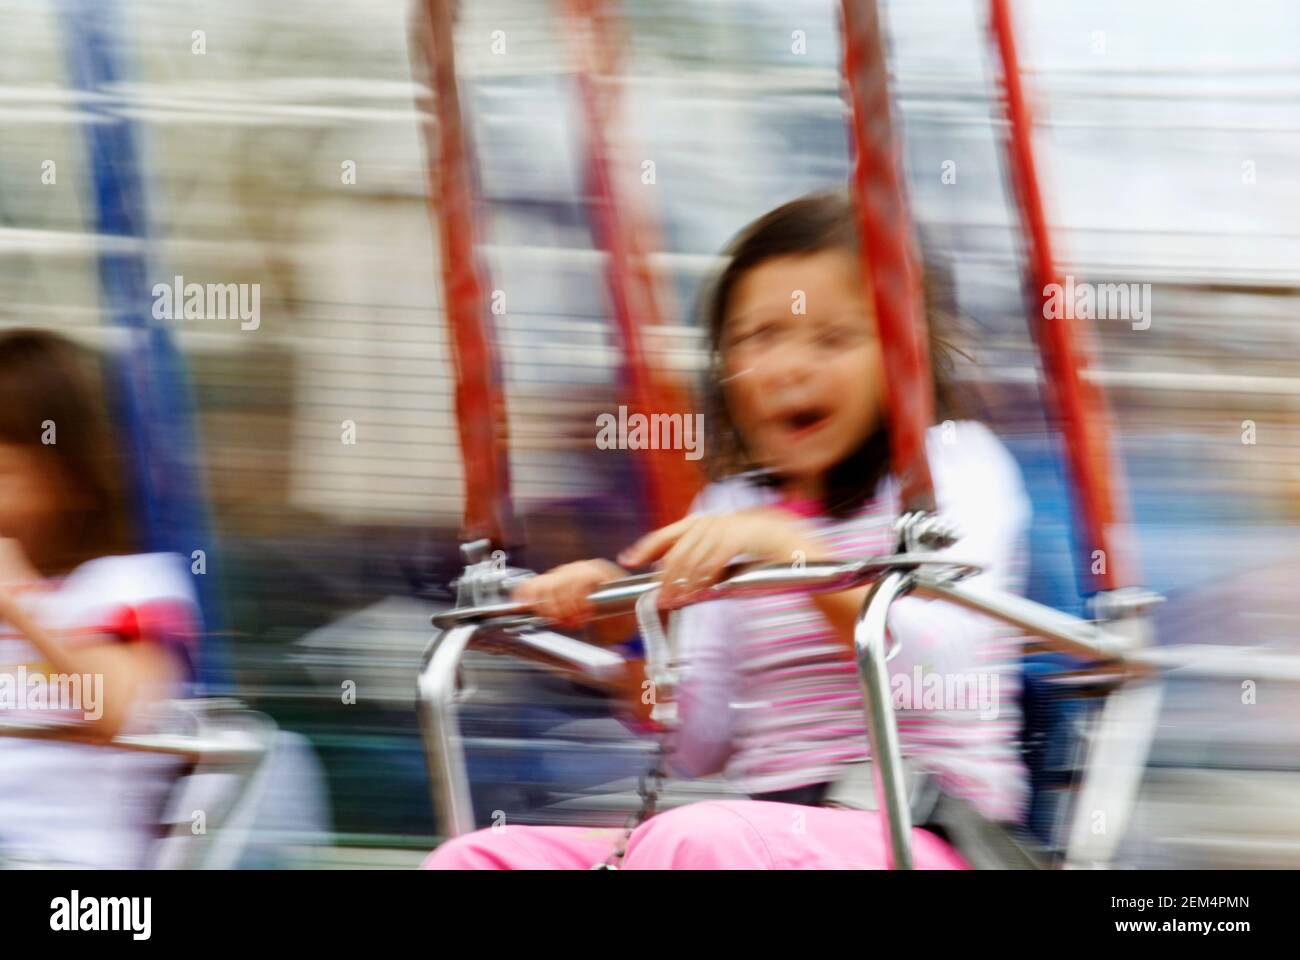 Two girls swinging on a chain swing Stock Photo